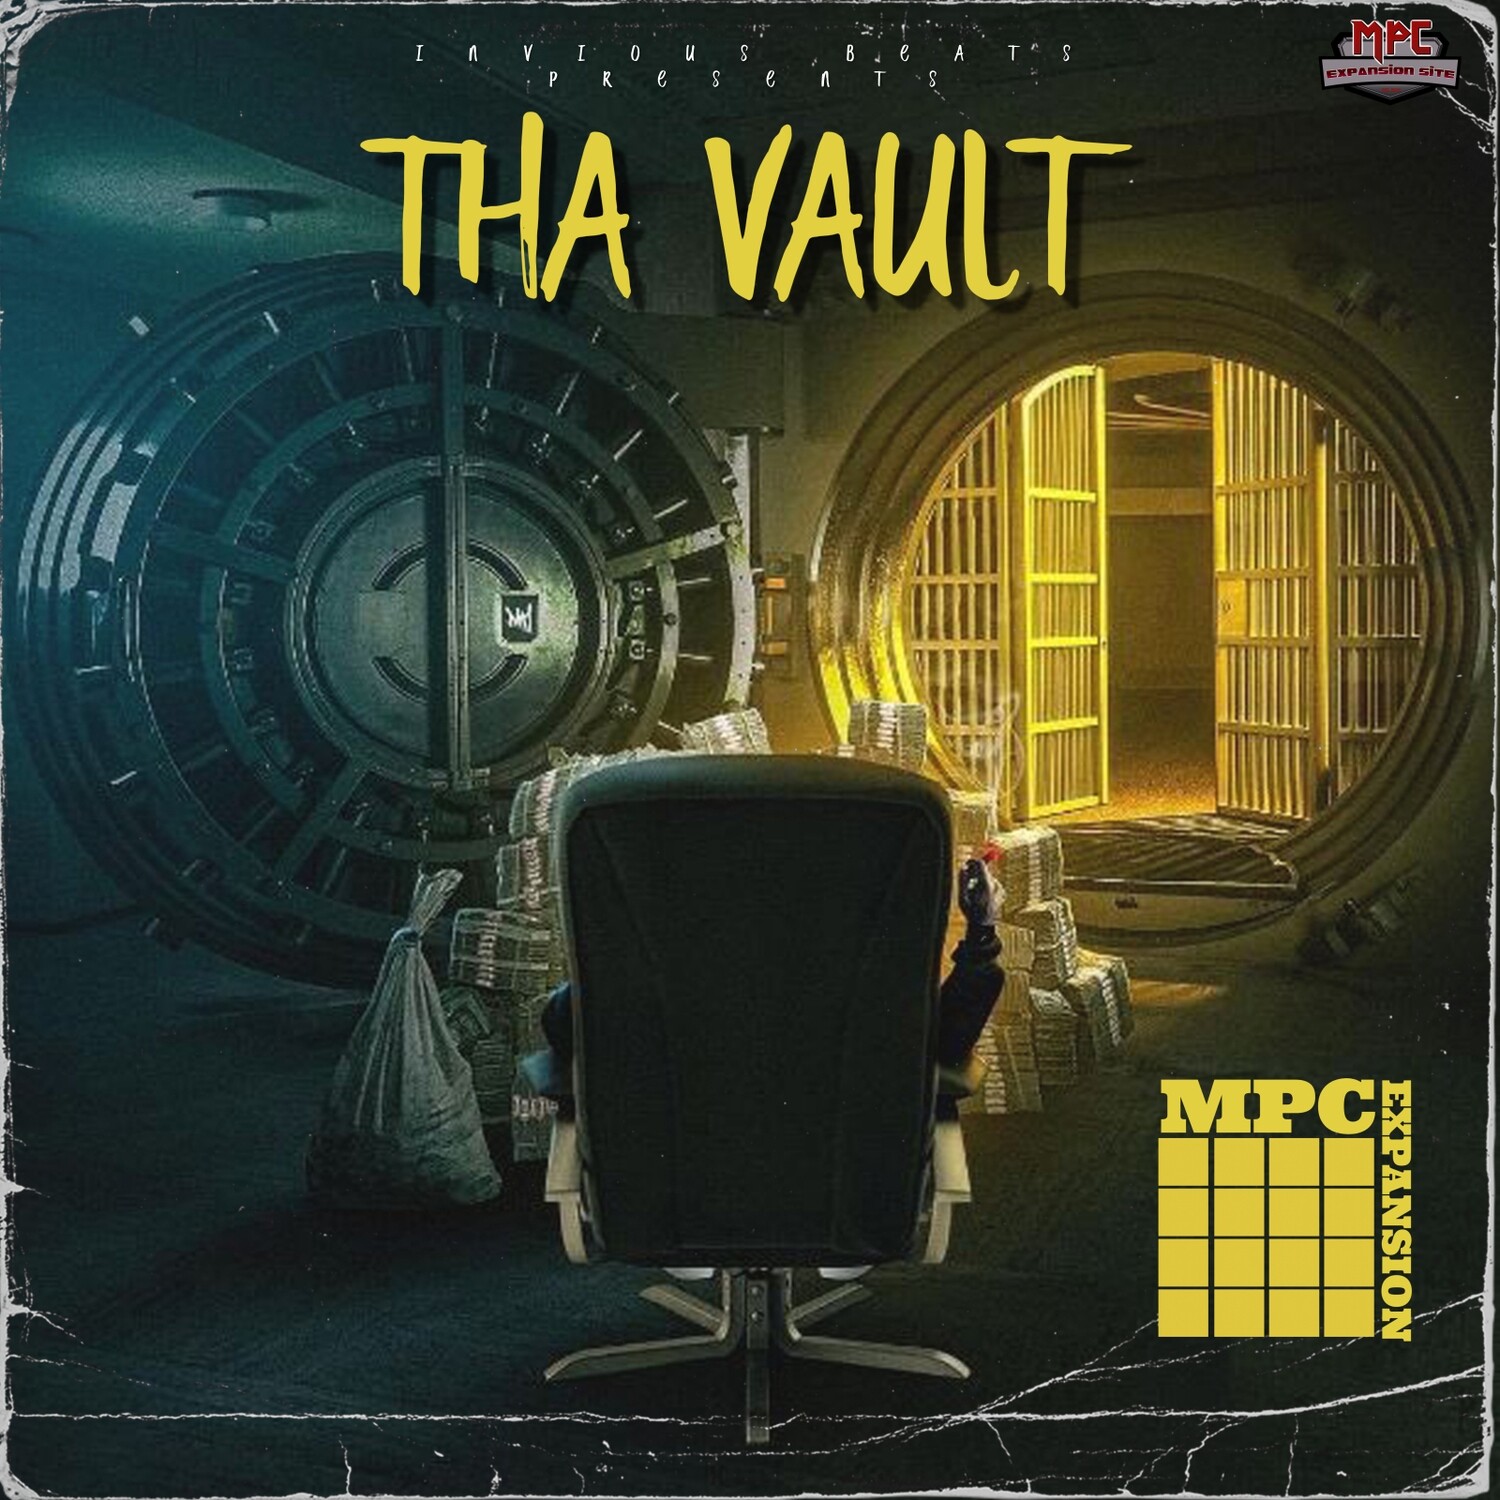 MPC EXPANSION 'THA VAULT' by INVIOUS